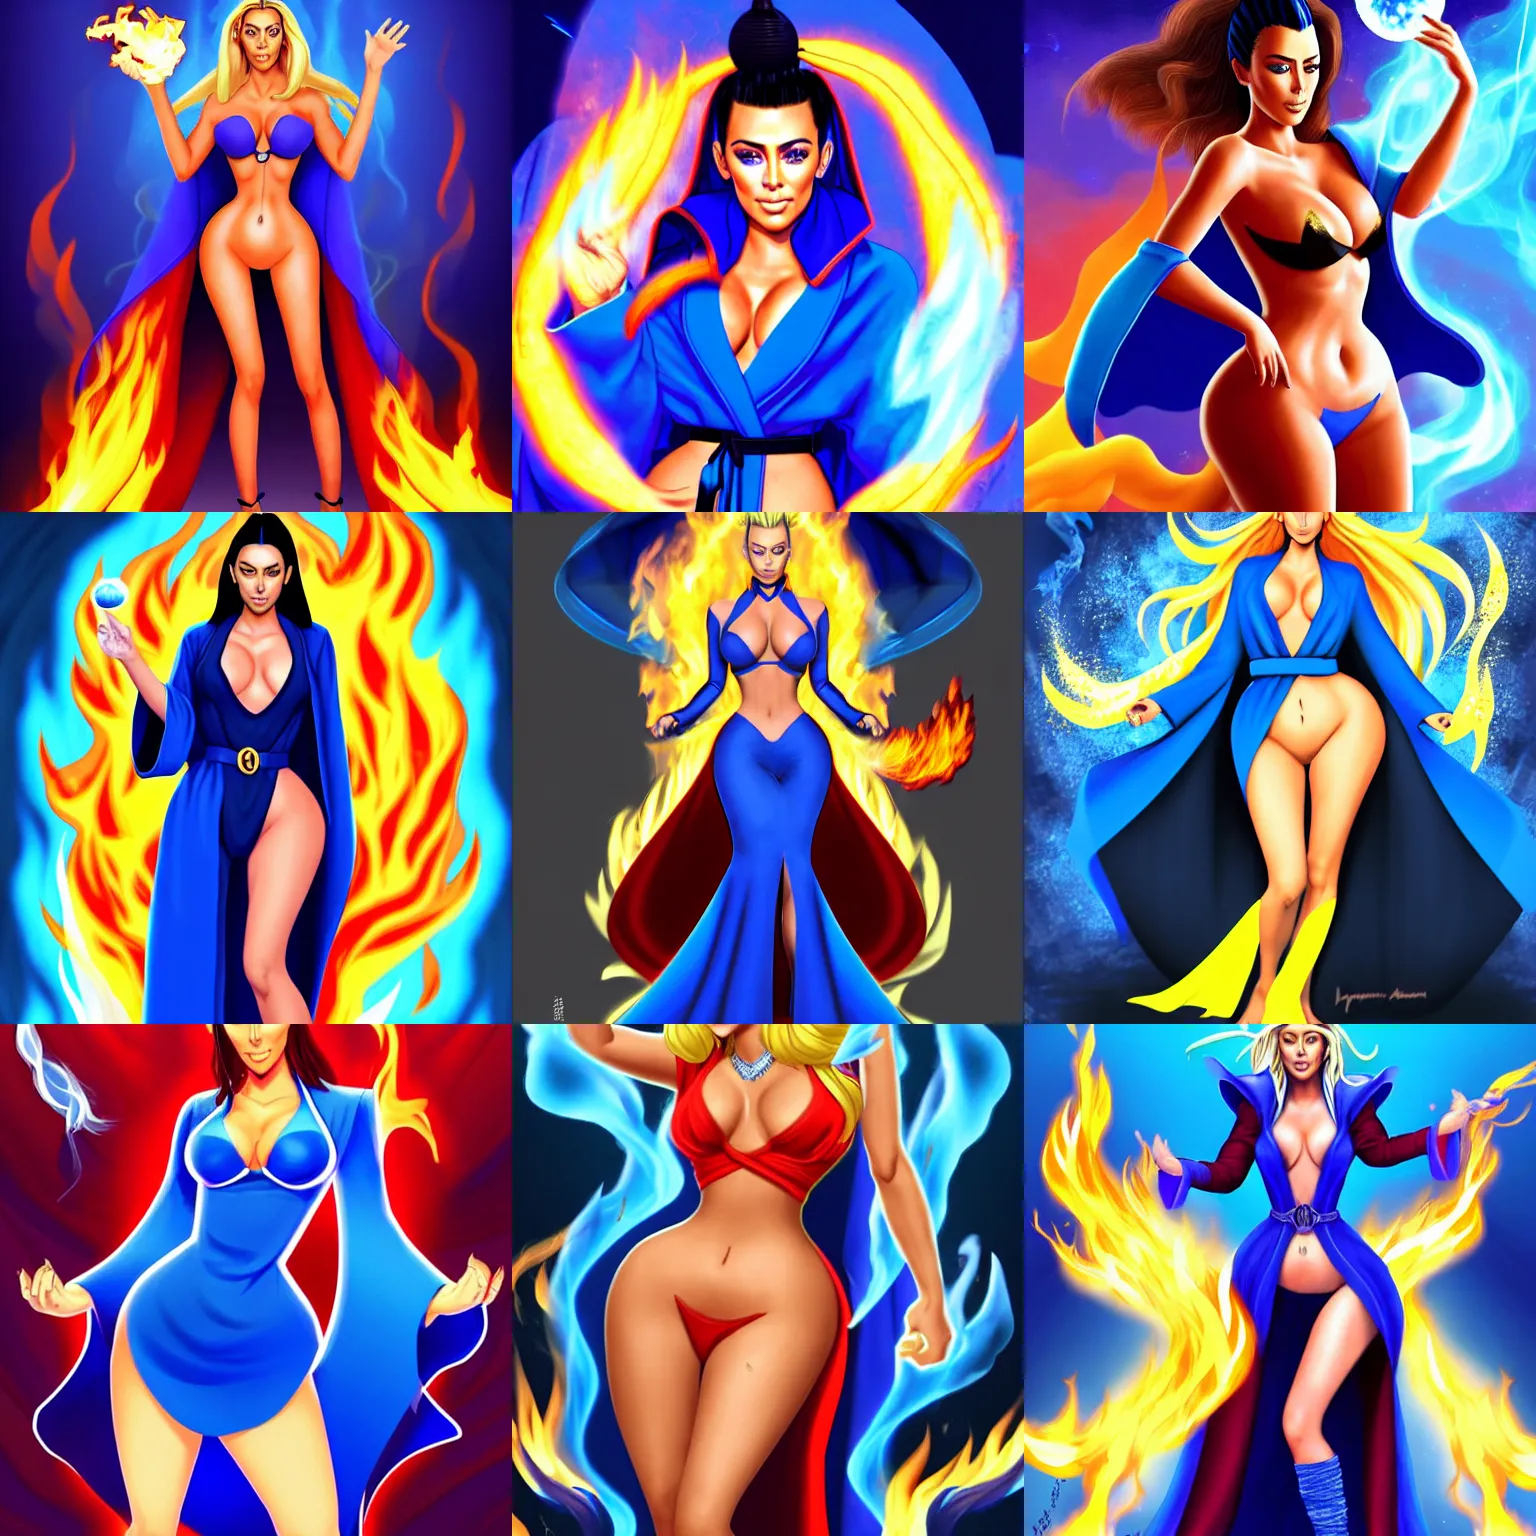 Prompt: Who : a mage with a blue robe casting a fire ball ; Face and hair : Amber Heard ; Body type : Kim Kardashian ; Clothes : covering ; IMPORTANT : Sakimichan Sakimichan Sakimichan Sakimichan official splash art, award winning, trending in category \'hyperdetailed\'